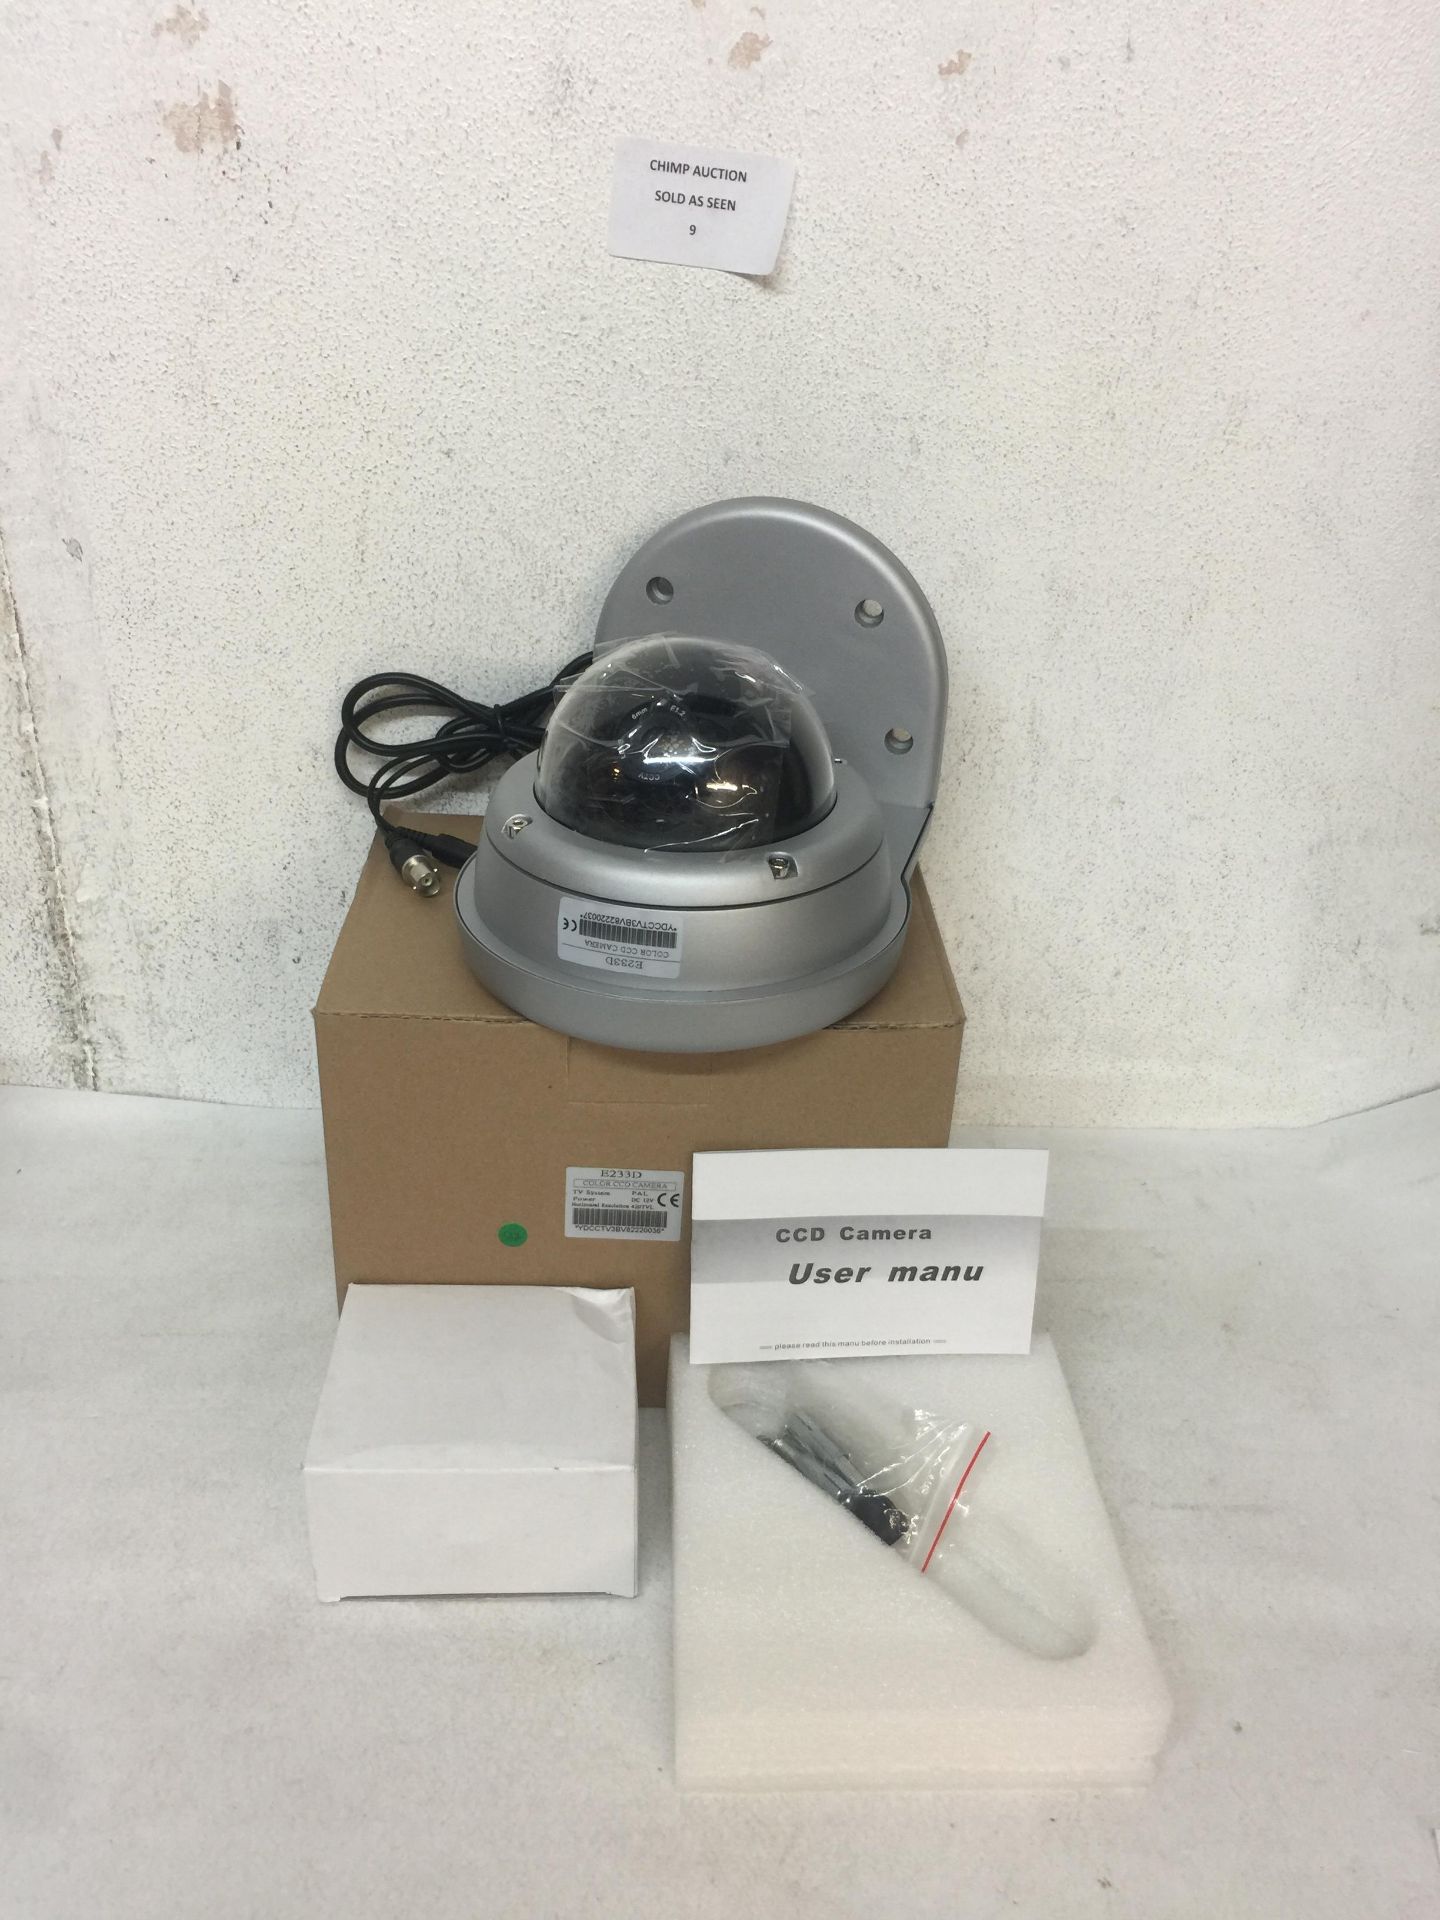 BRAND NEW E233D COLOR CCTV SECURITY CCD CAMERA & BRACKET RRP £79.99.